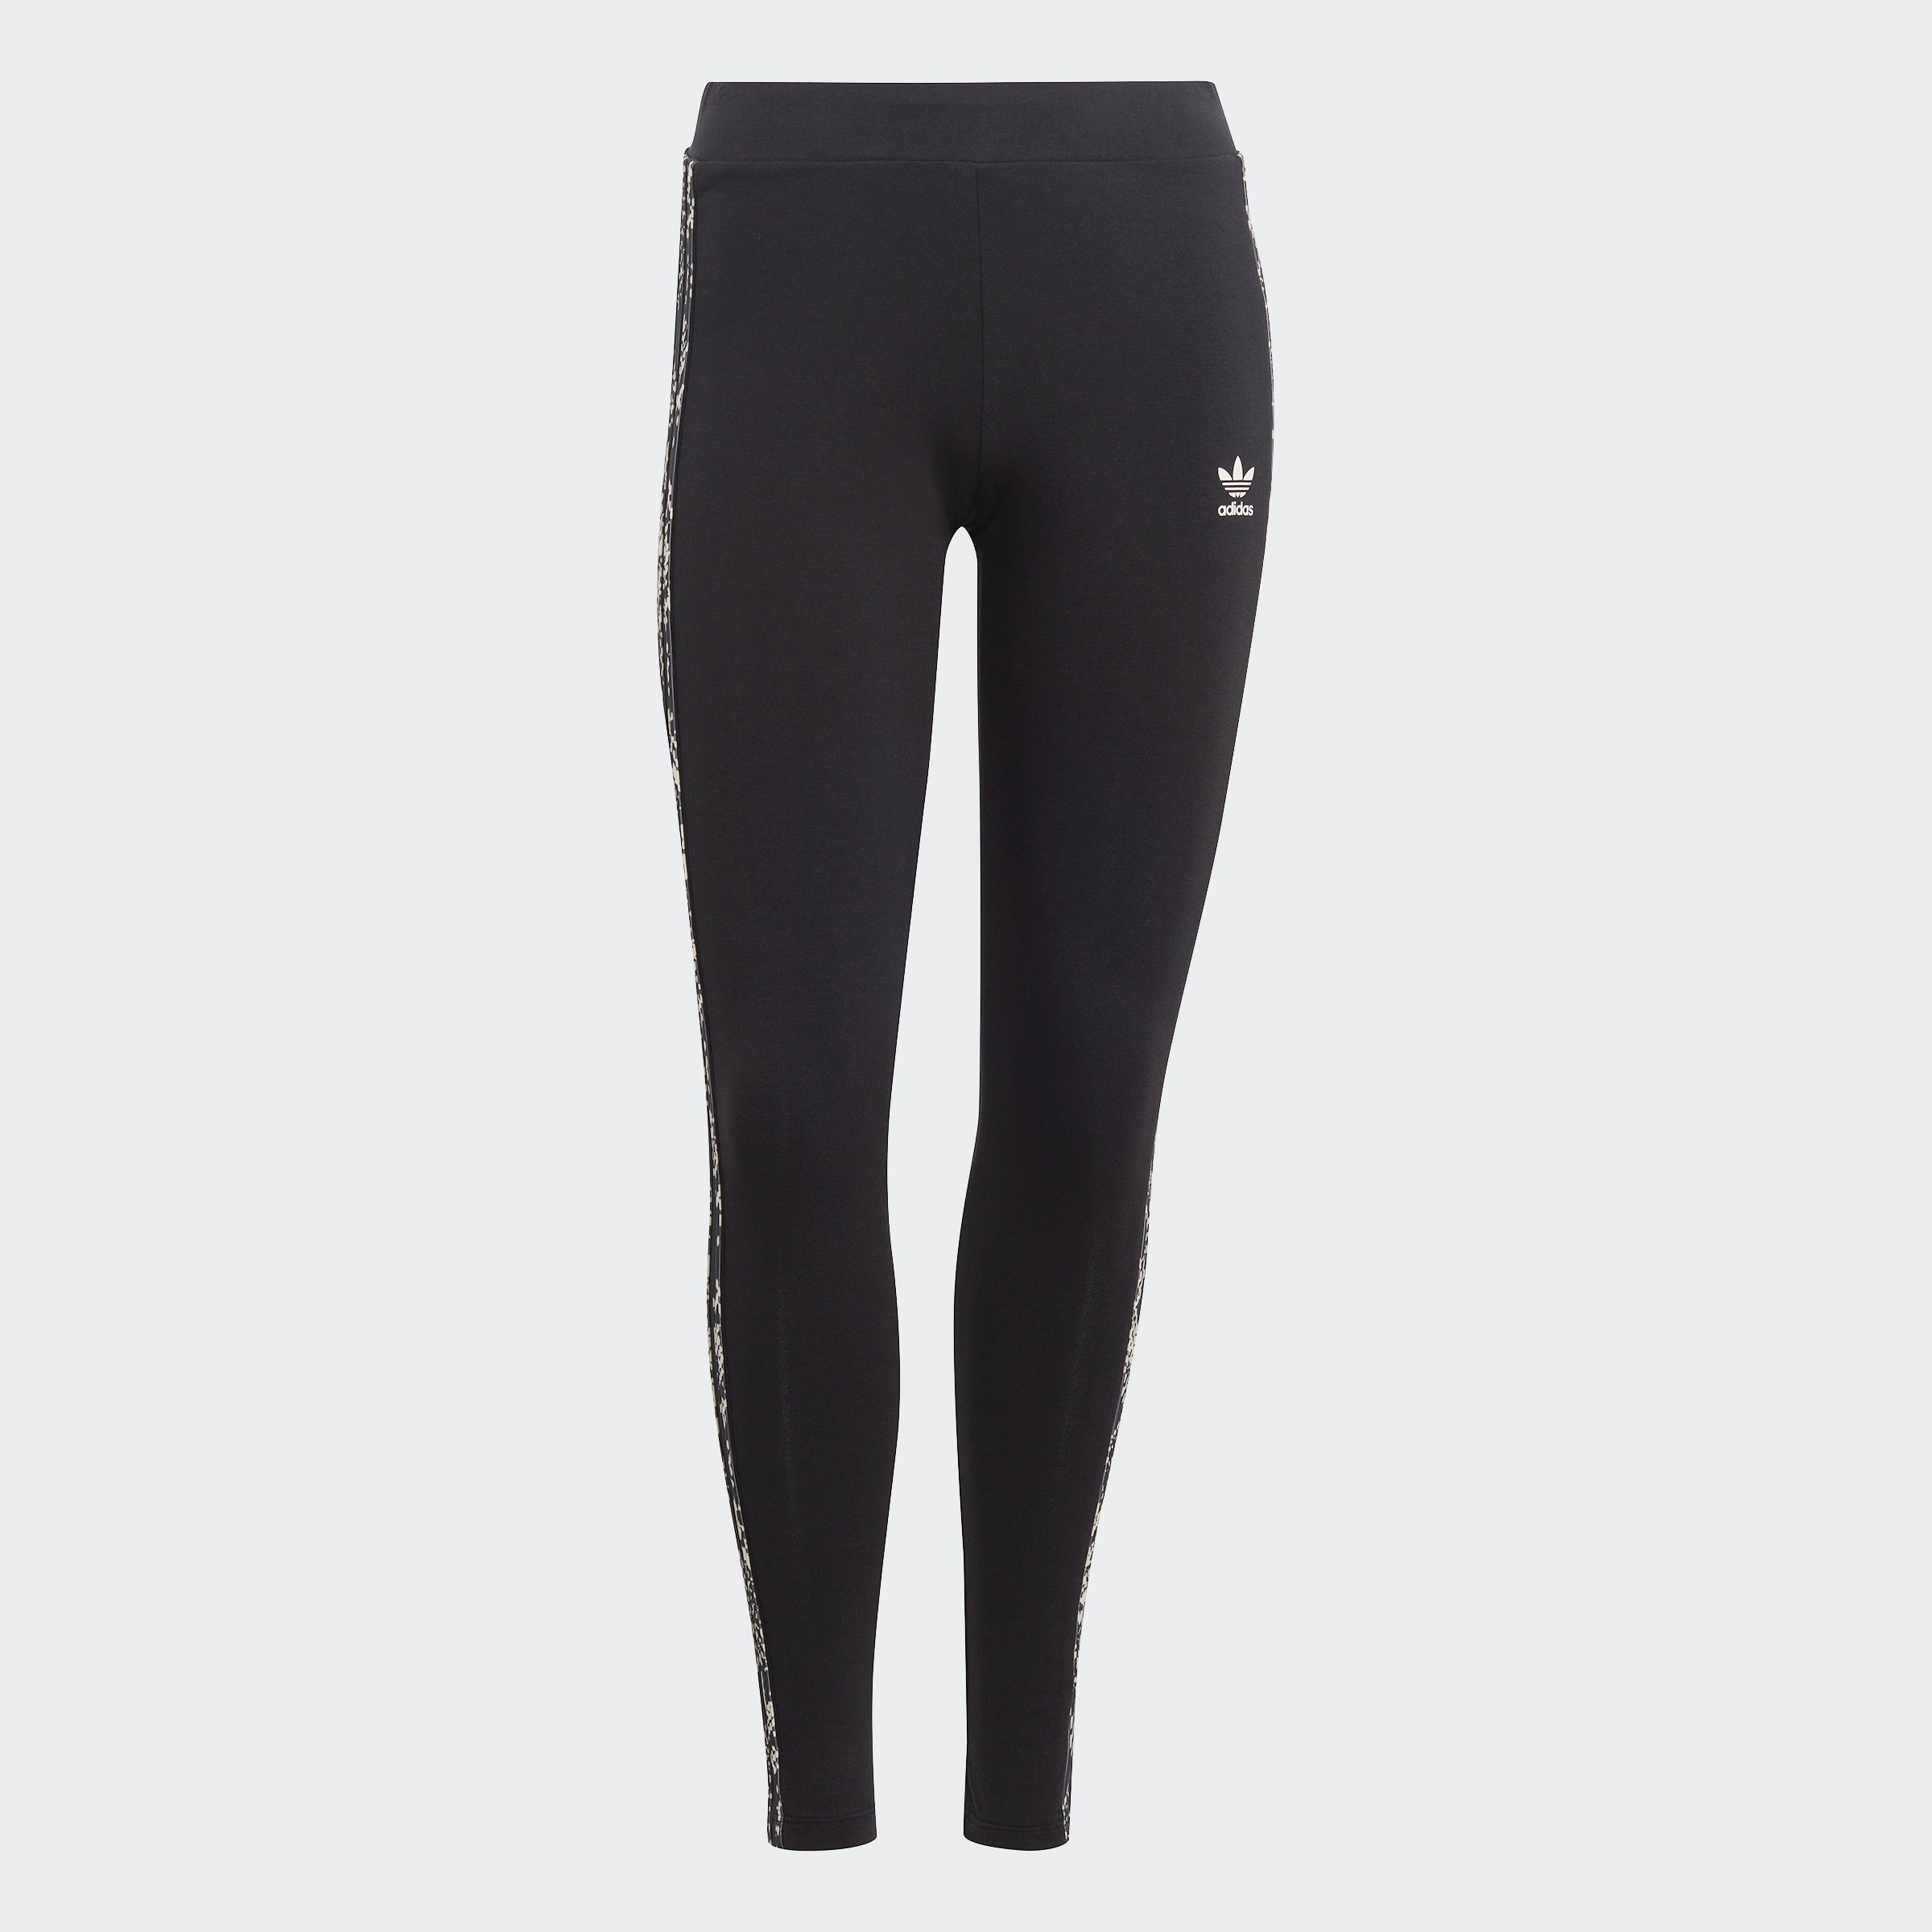 NEW ADIDAS ORIGINALS WOMENS SNAKE SKIN LUXE TREFOIL TIGHTS ~SIZE